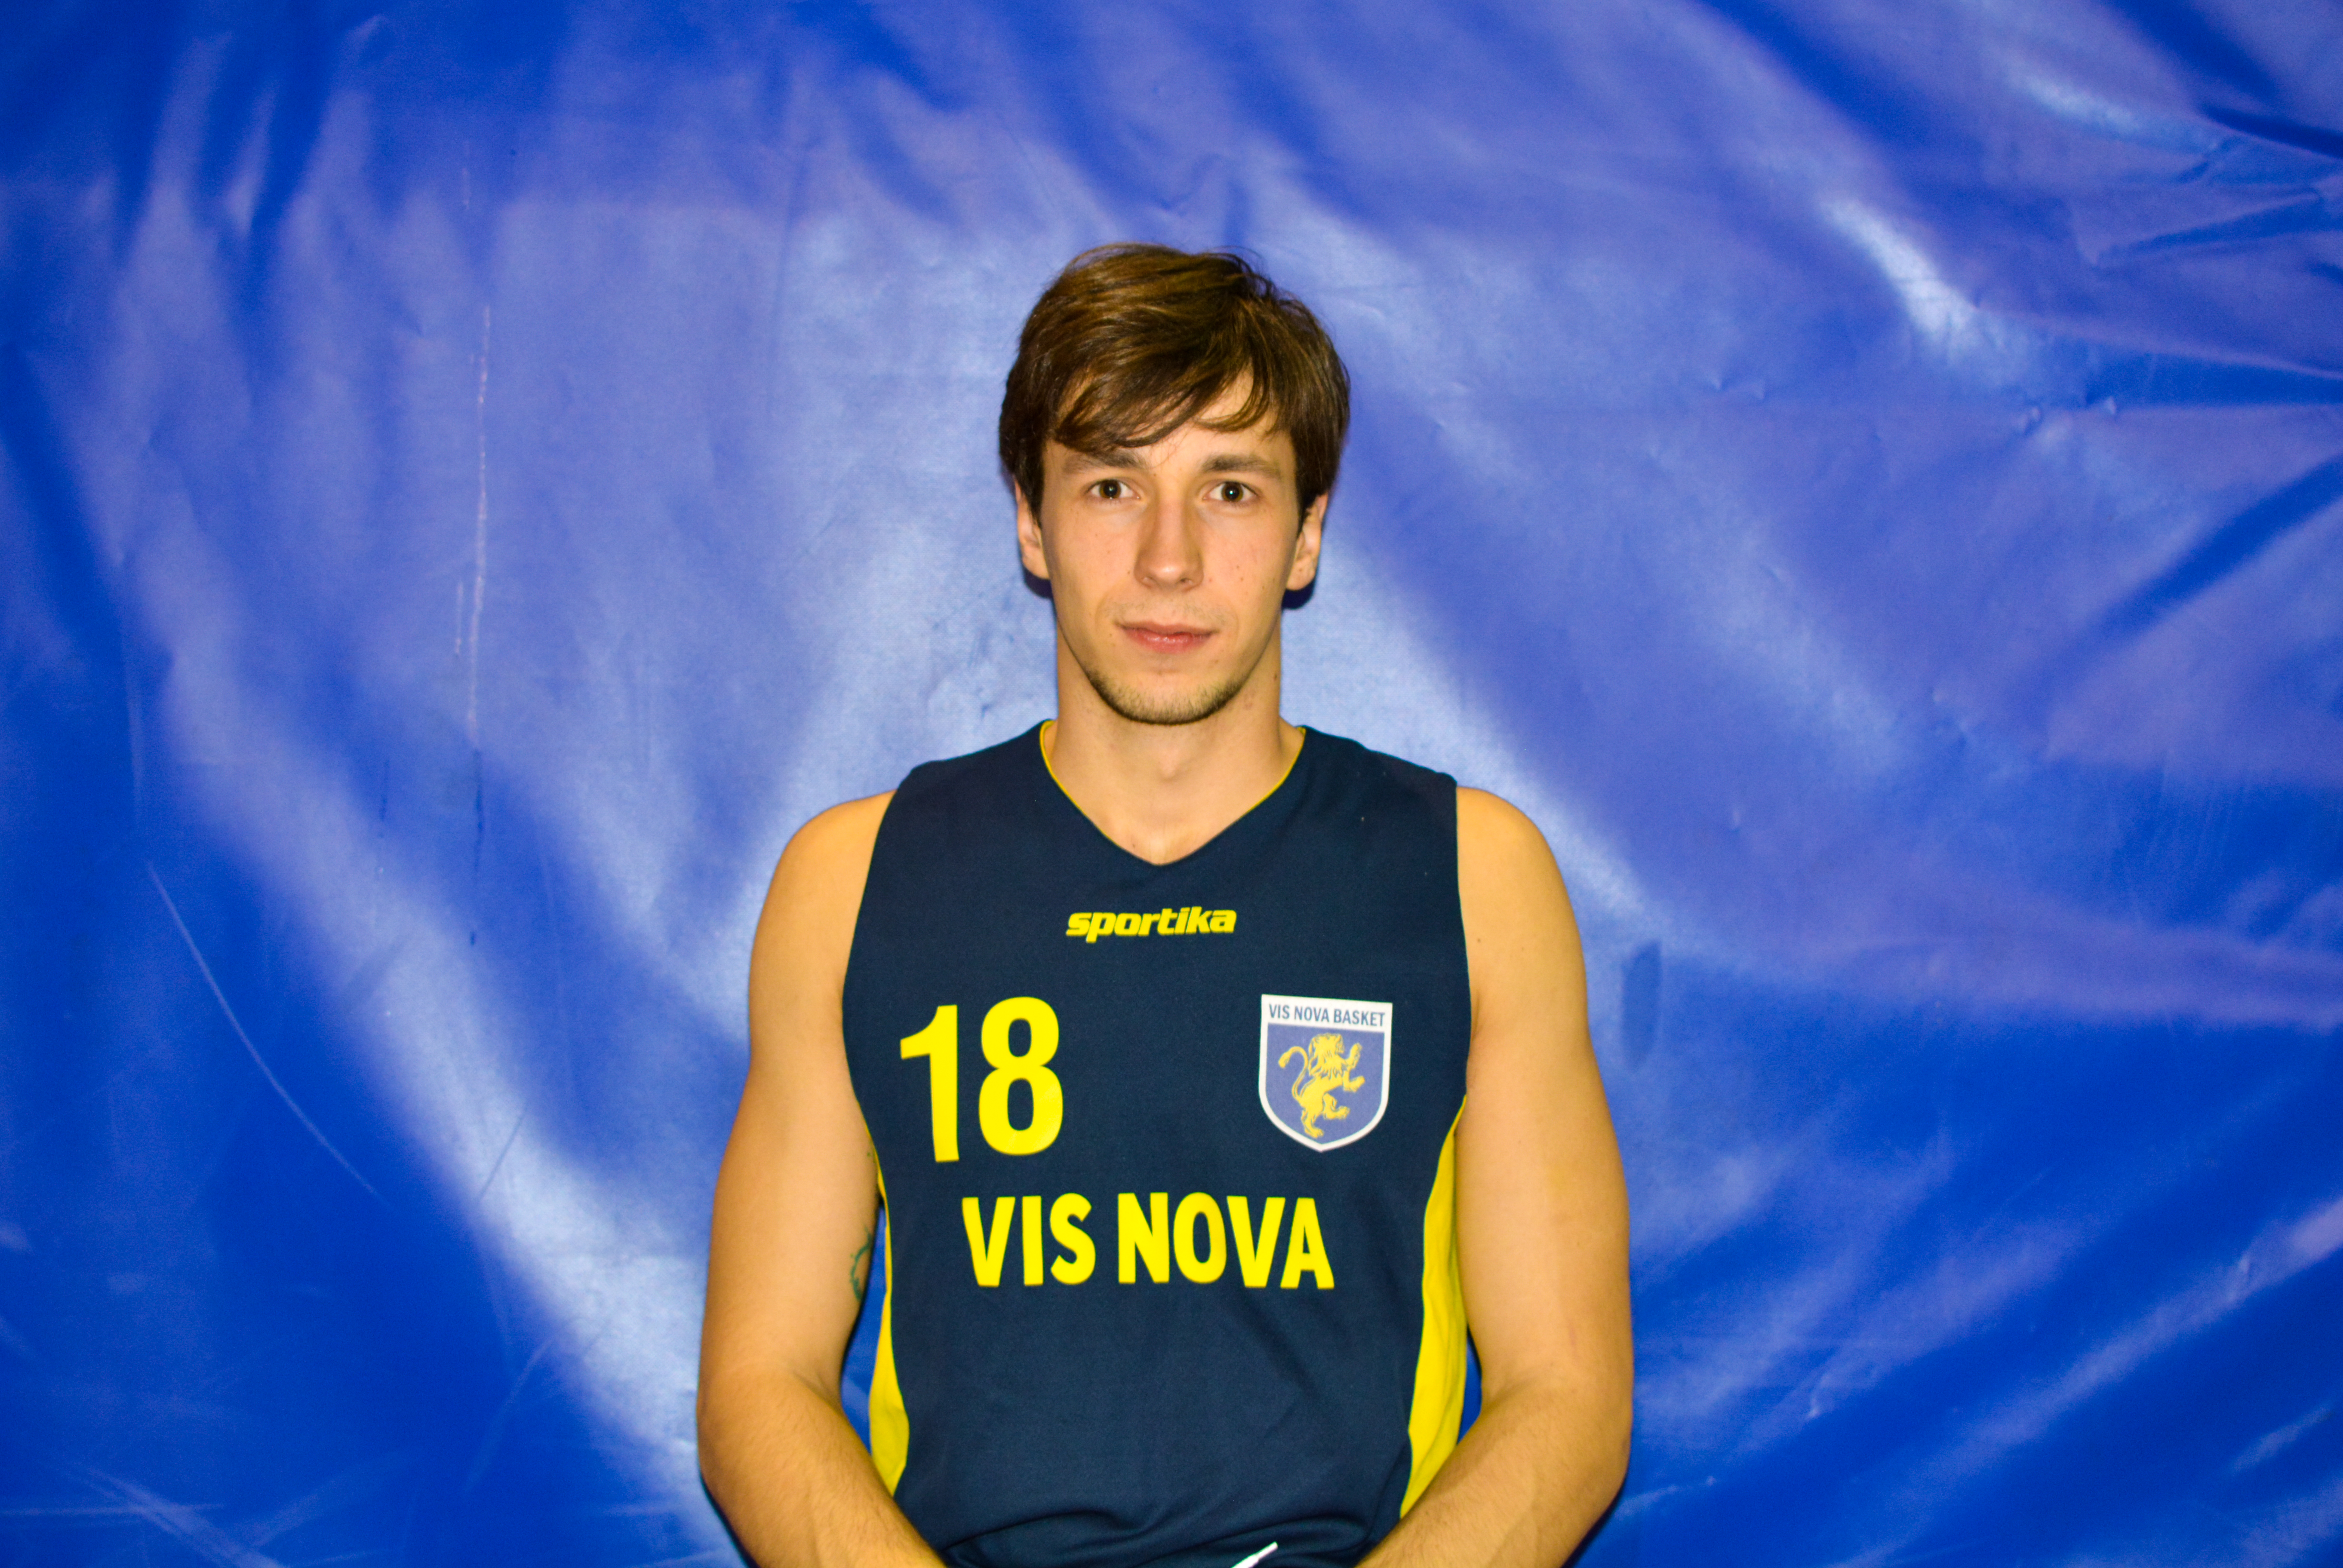 Al momento stai visualizzando <strong class="sp-player-number">18</strong> Alfonsi Vittorio